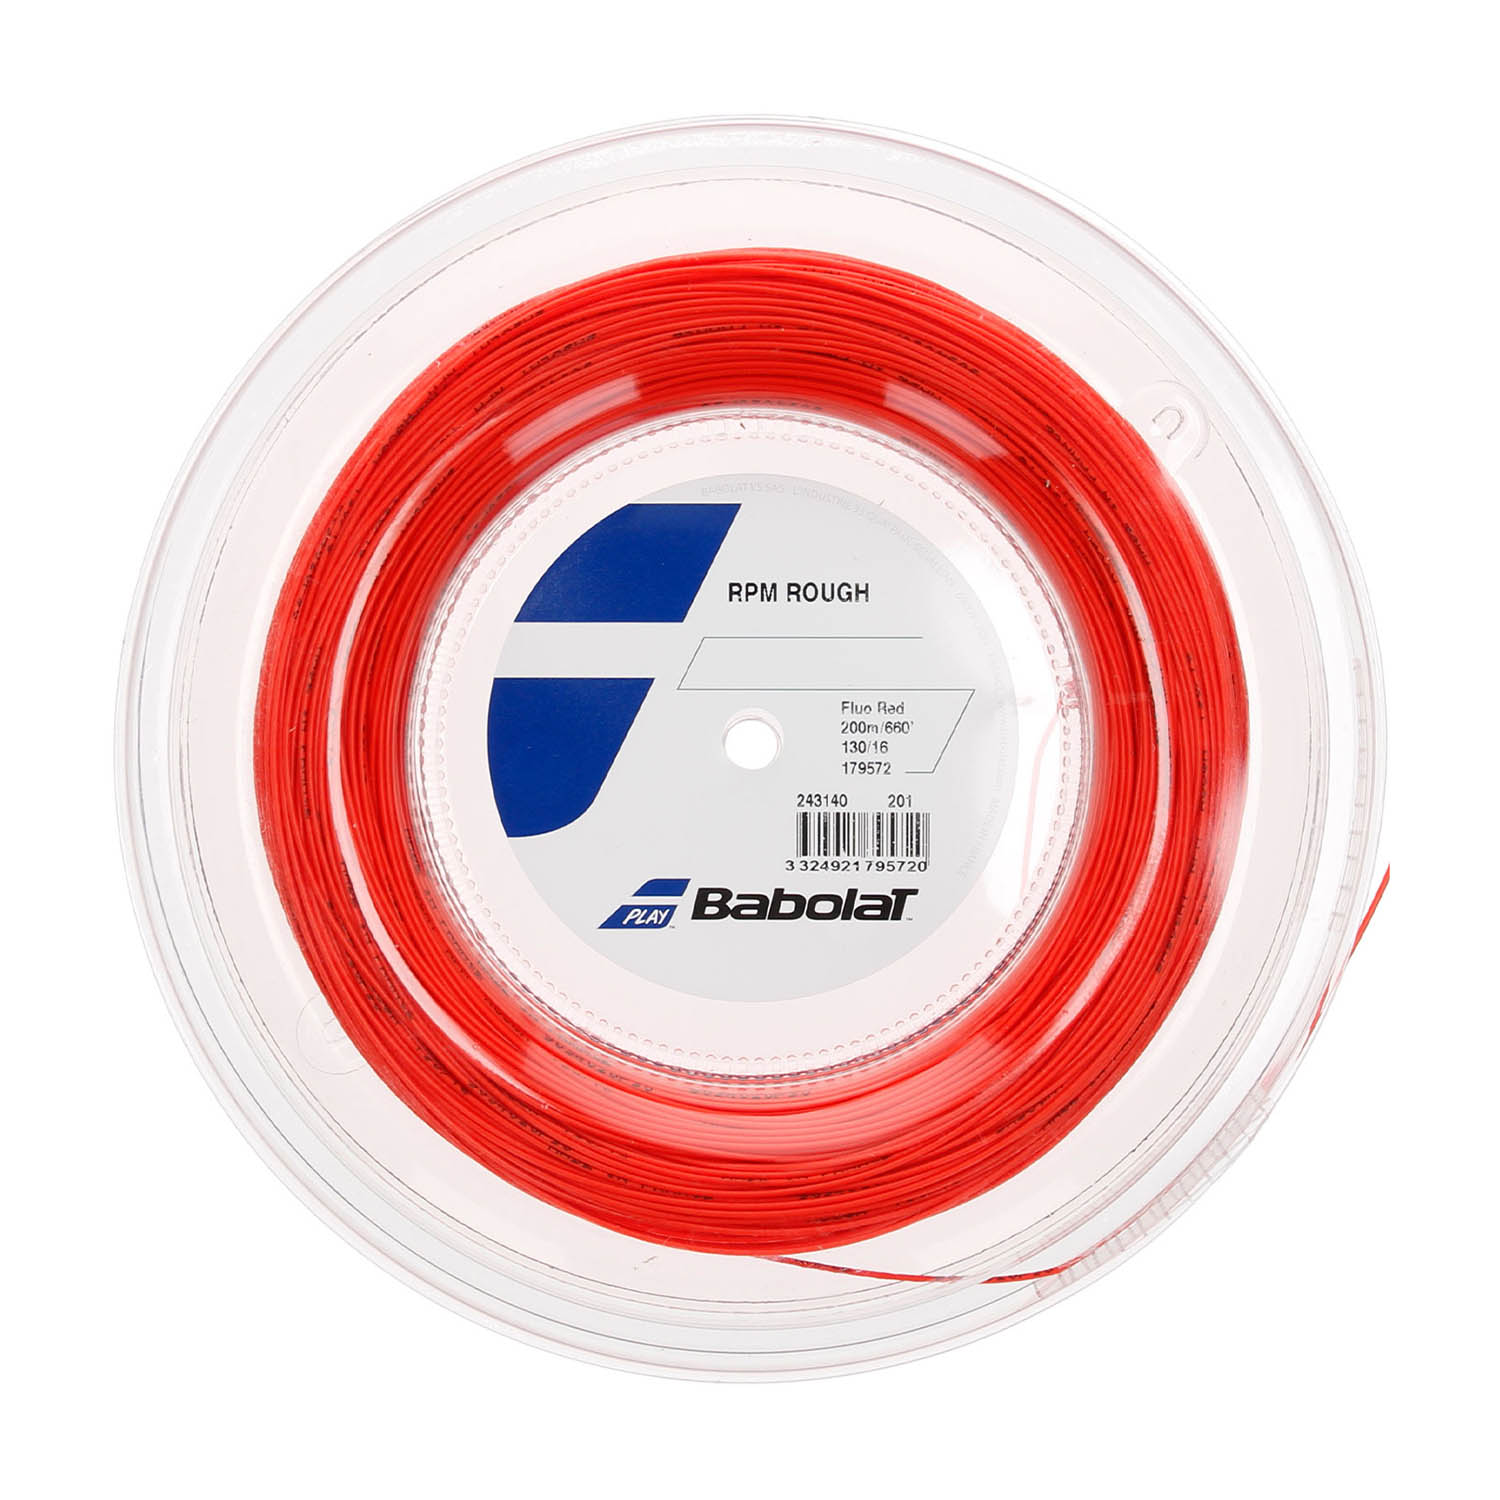 Babolat RPM Rough 1.30 200 m String Reel - Red Fluo